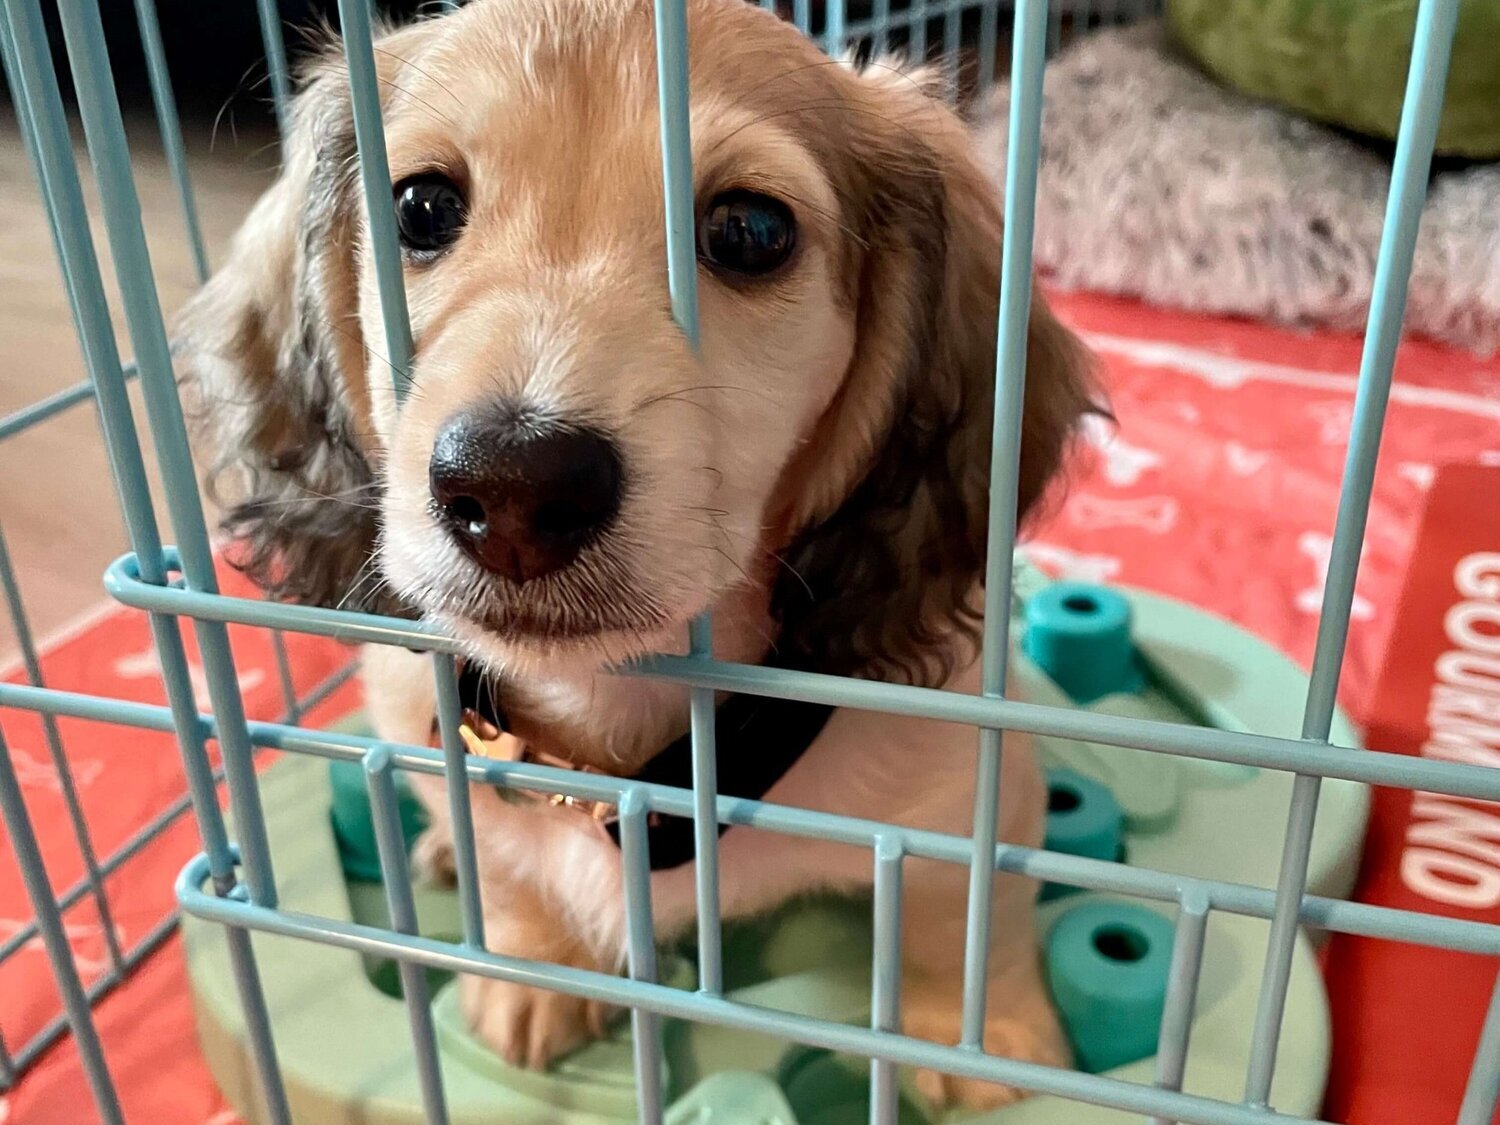 How To Help Dog With Crate Anxiety